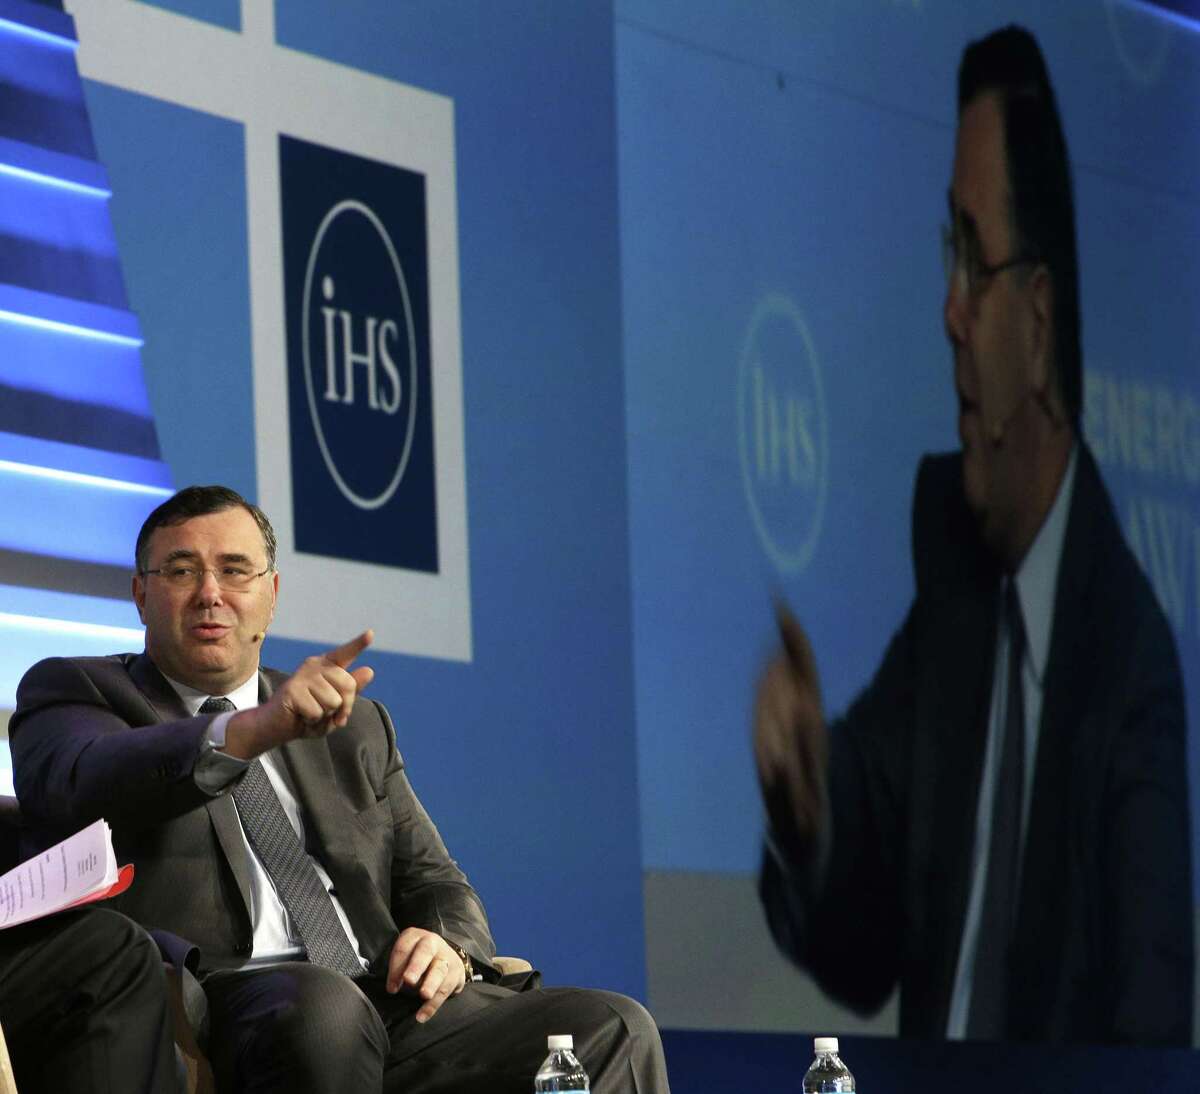 Patrick Pouyanné is Chief Executive Officer and President of the Executive Committee of TOTAL speaks during the oil keynote at IHS Energy CERAWeek Tuesday April 21, 2015 at the Hilton Americas-Houston. (Billy Smith II / Houston Chronicle)